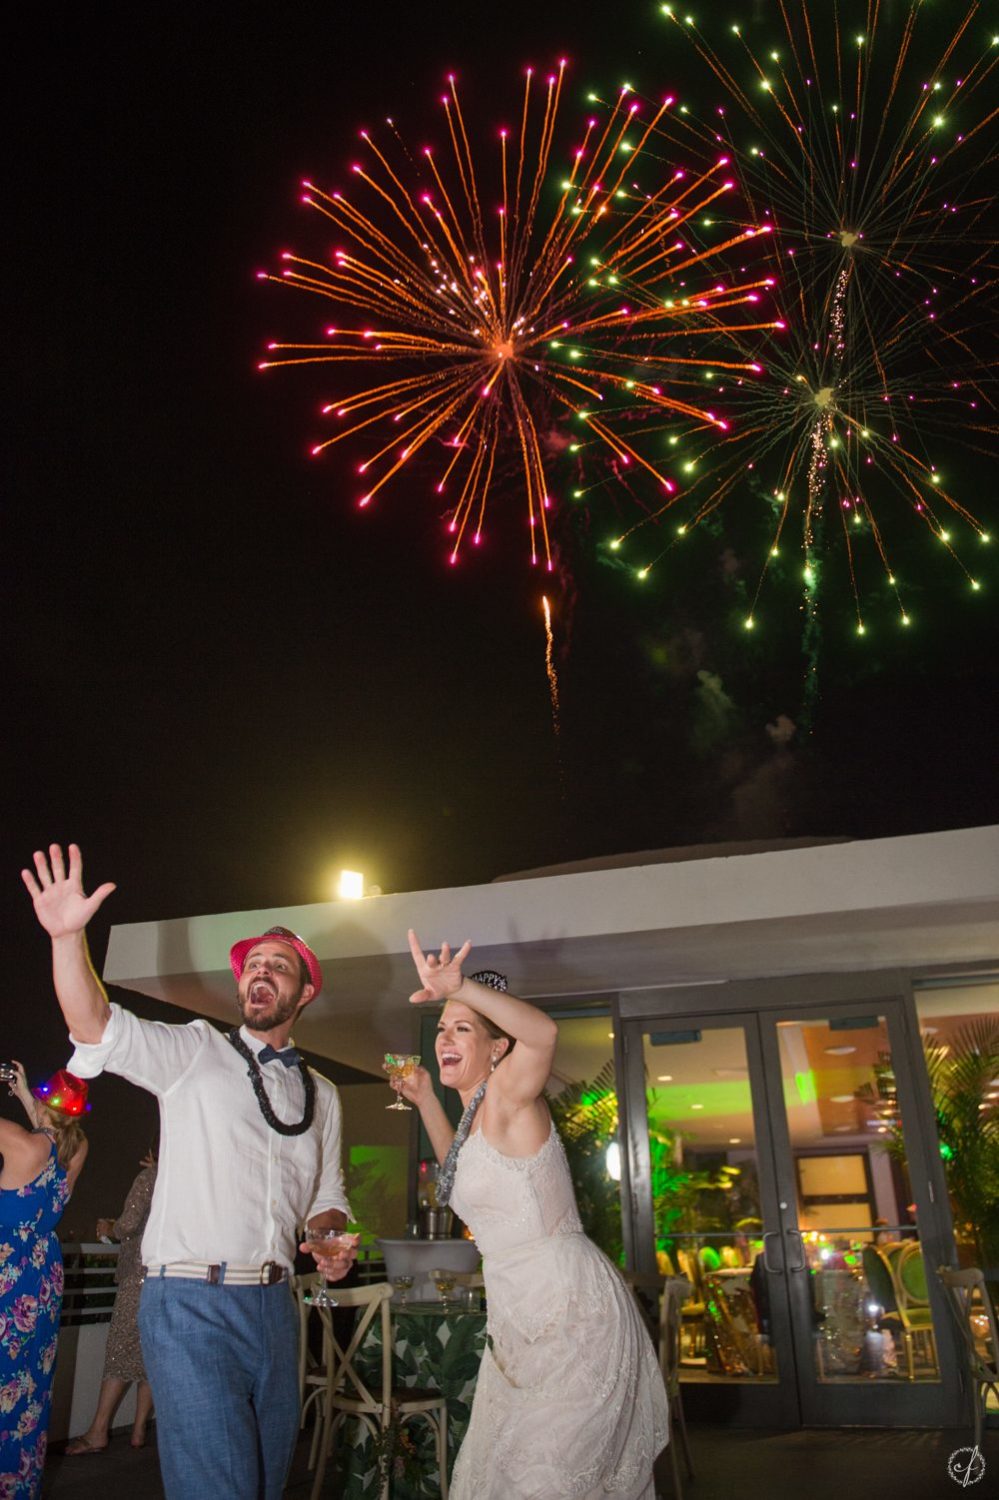 New years eve wedding at La Concha Resort, captured by Camille Fontanez, Puerto Rico wedding photographer